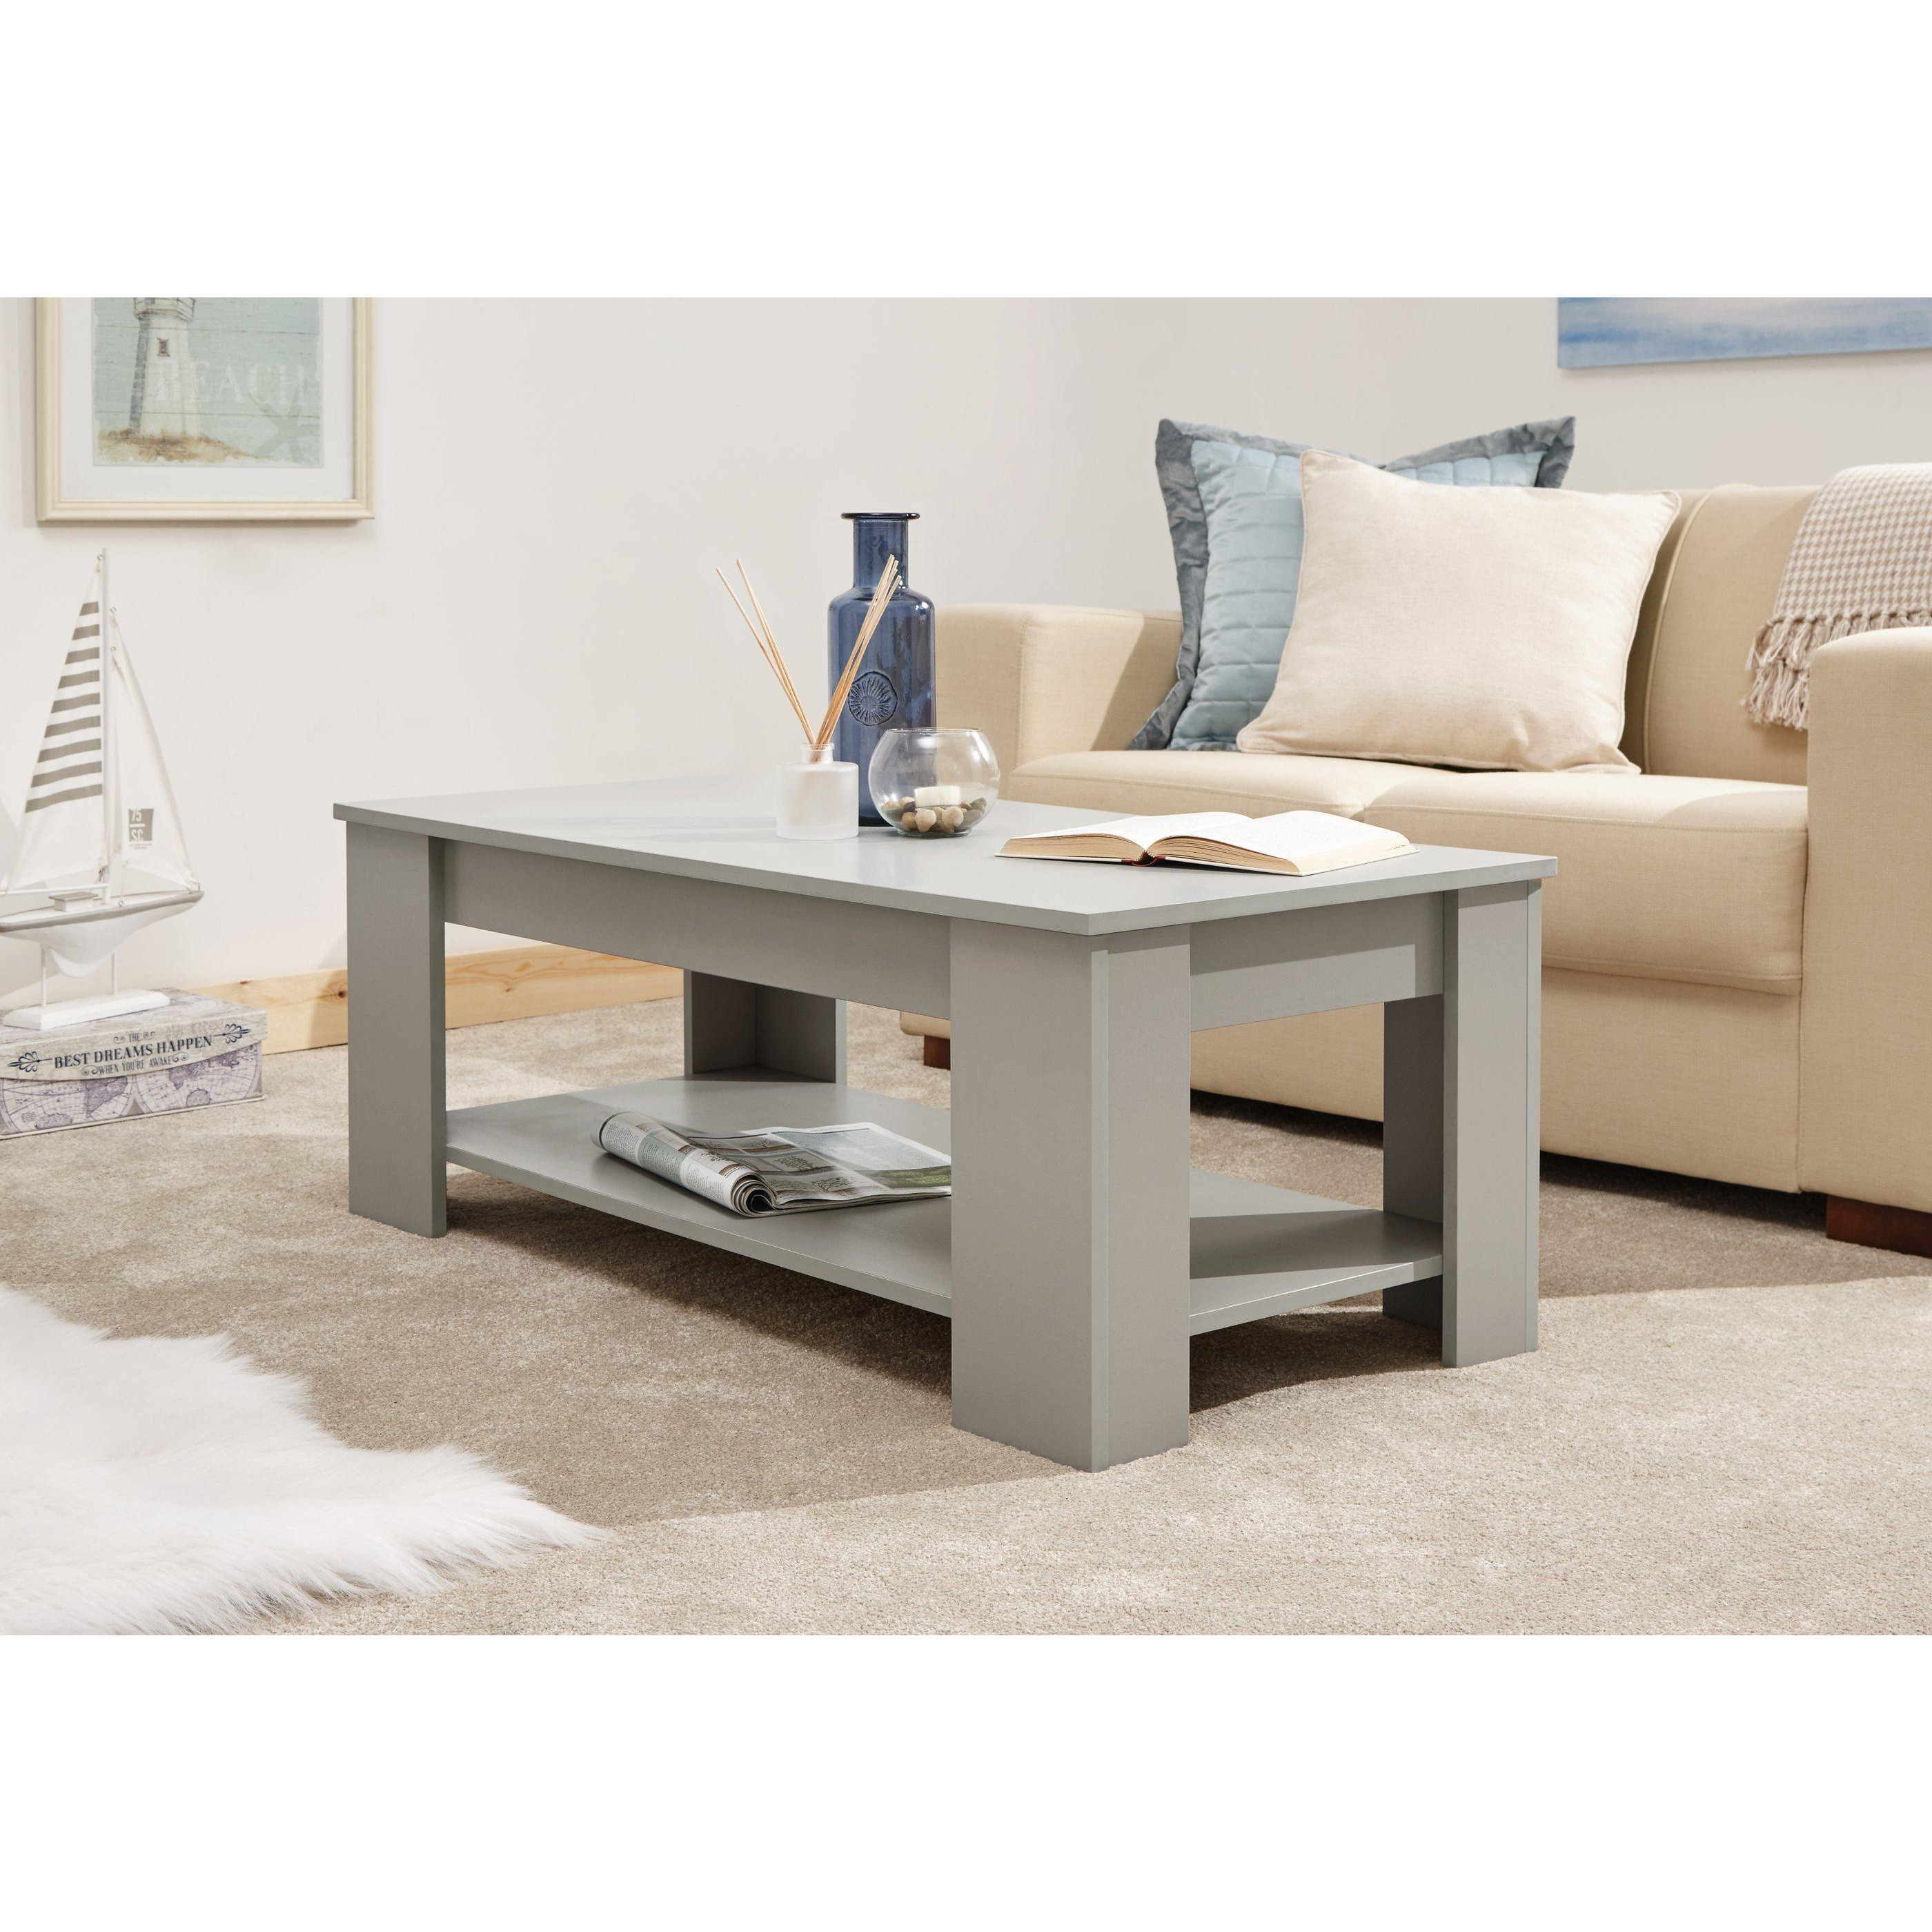 Lift Up Coffee Table - image 1